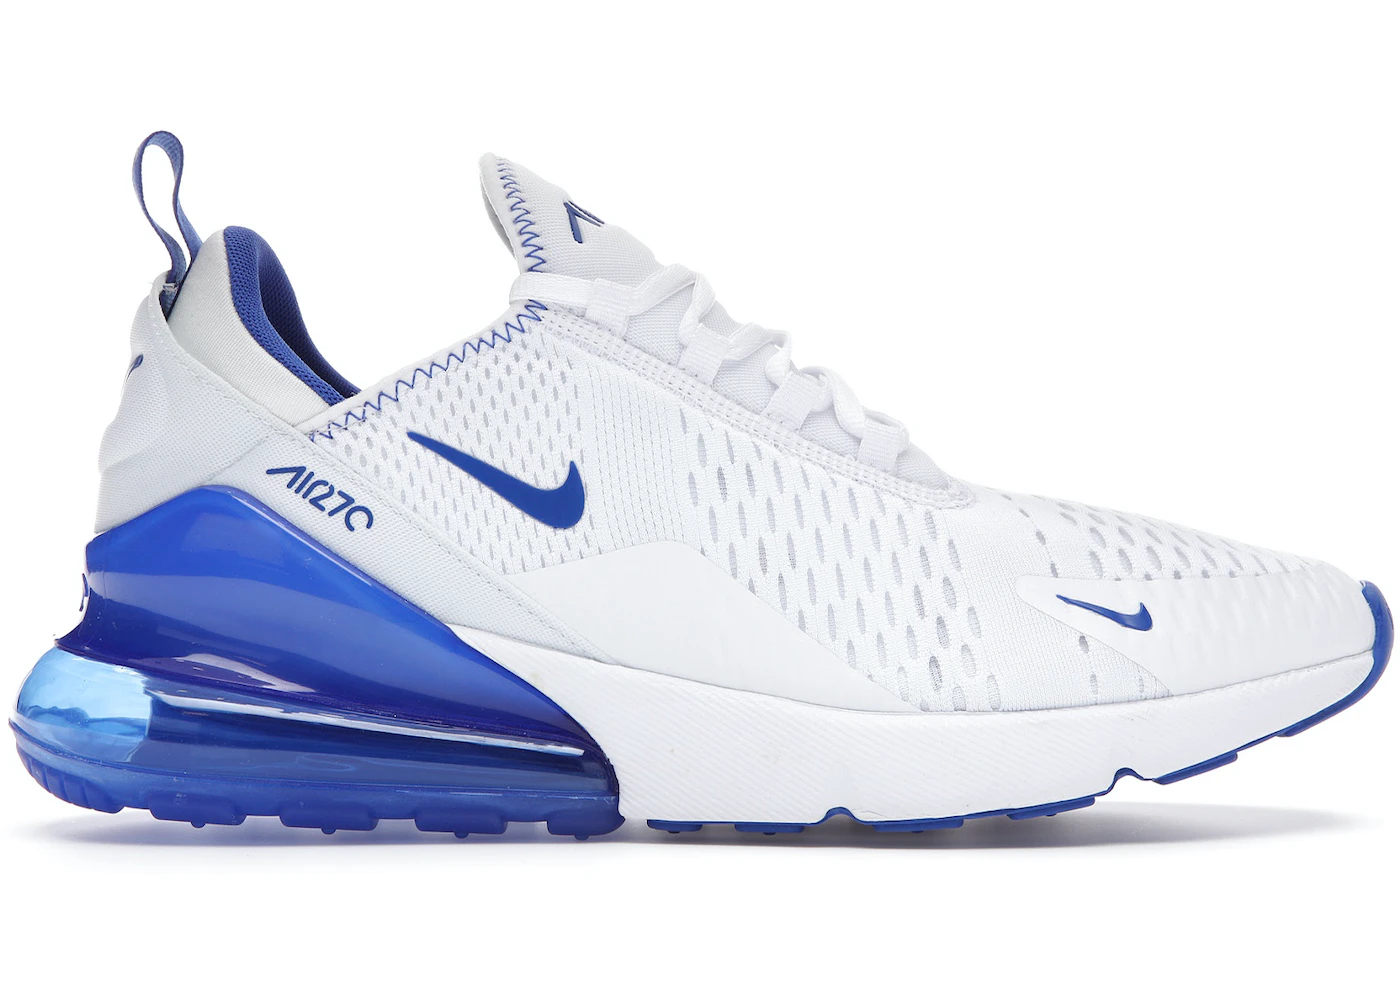 https://images.stockx.com/images/Nike-Air-Max-270-White-Royal-Product.jpg?fit=fill&bg=FFFFFF&w=700&h=500&fm=webp&auto=compress&q=90&dpr=2&trim=color&updated_at=1621449801